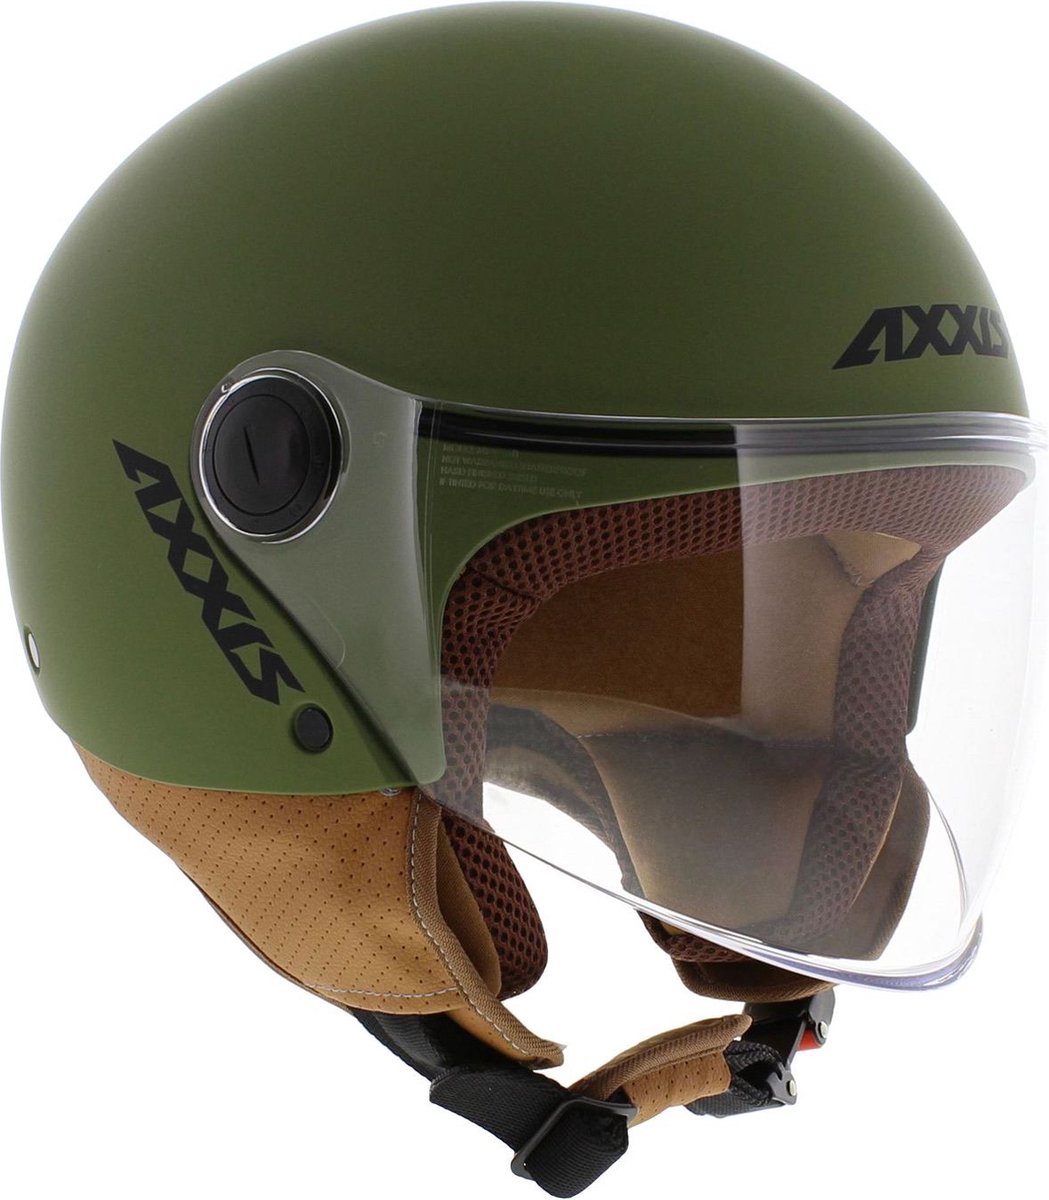 Axxis Square S helm mat groen M - Motor / Scooter / Brommer